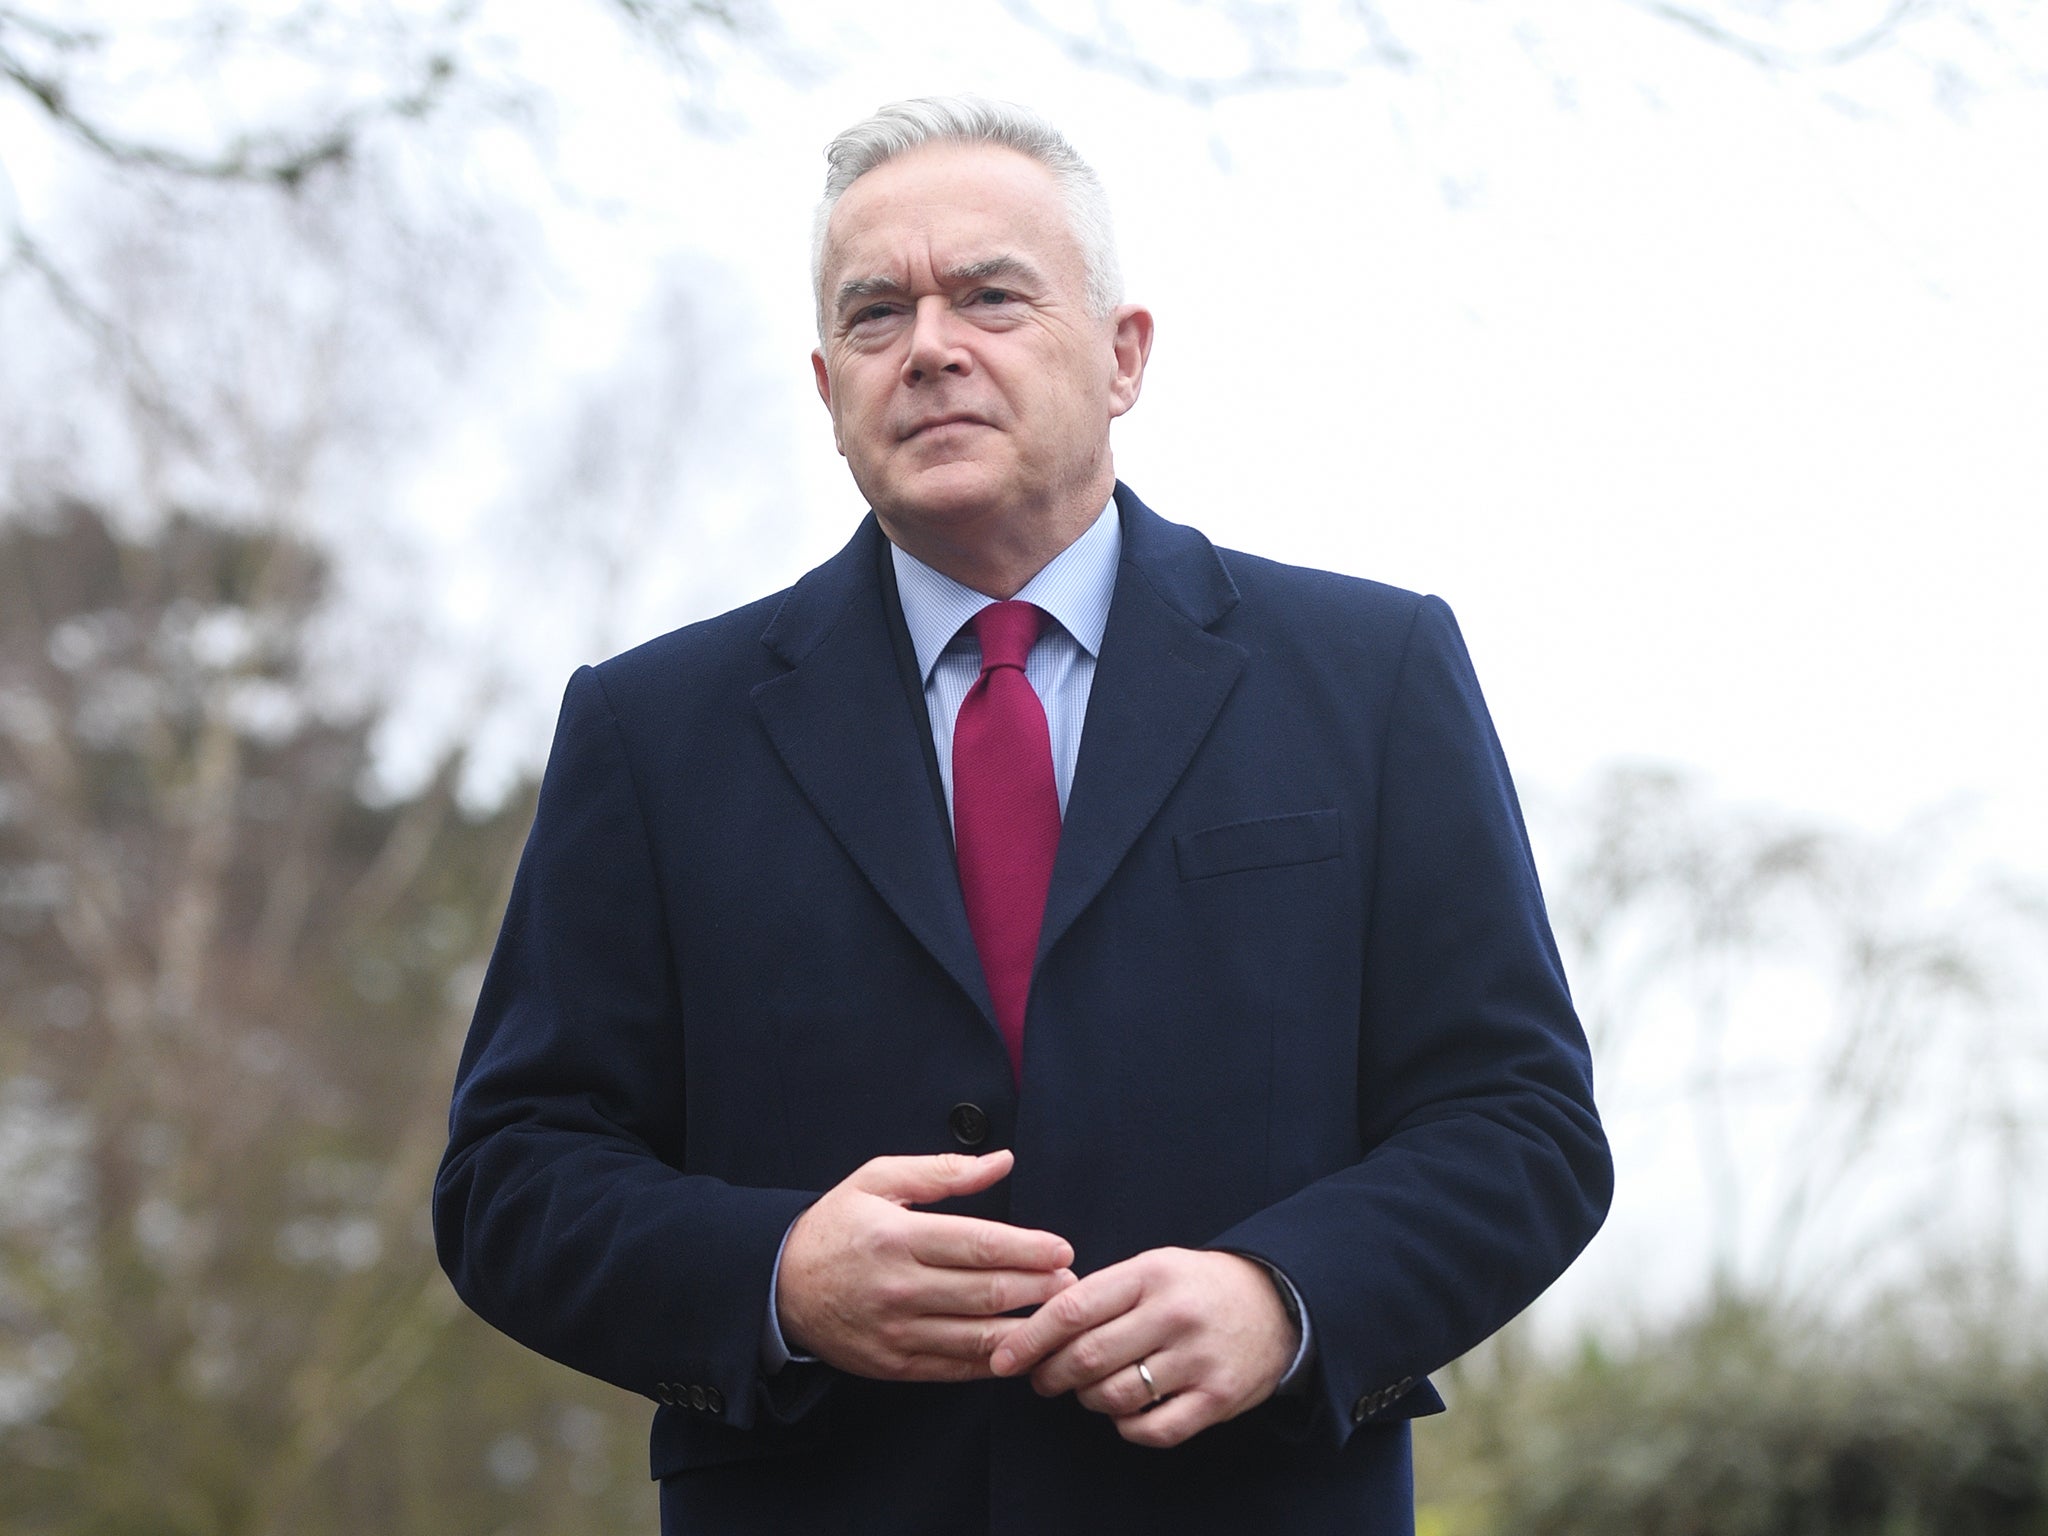 Huw Edwards BBC presenter who broke Queens death now at centre of sex scandal The Independent